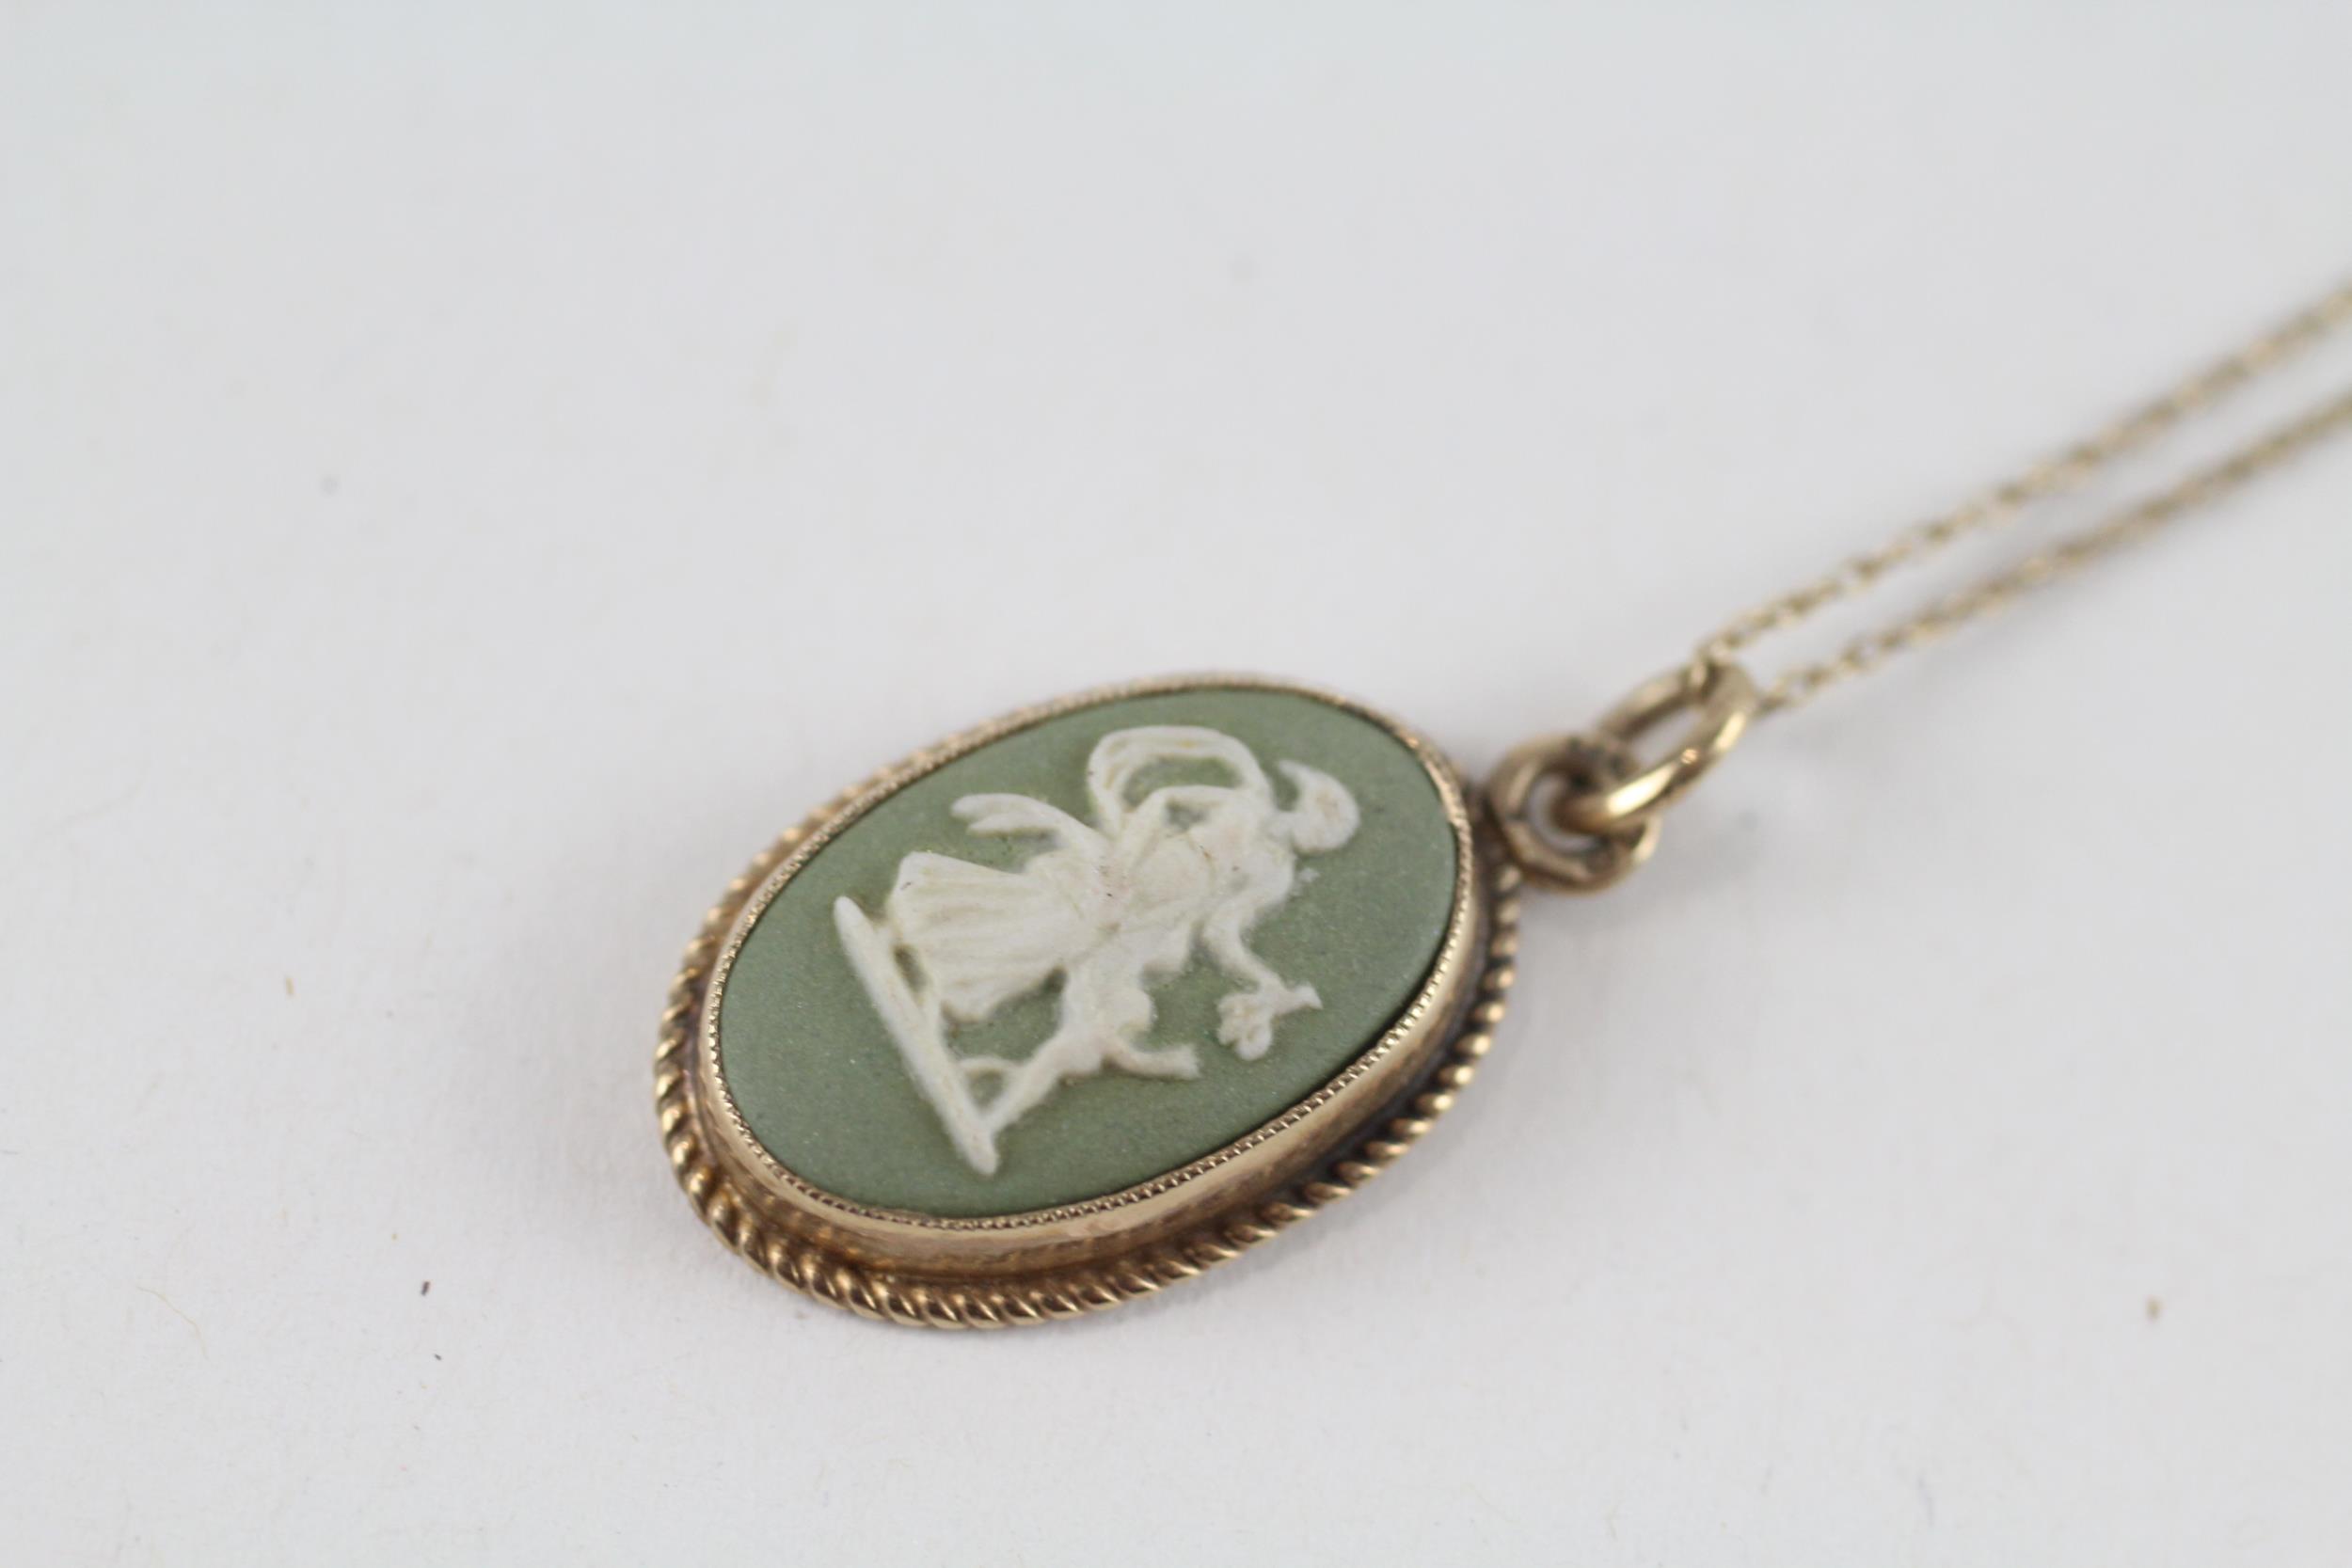 9ct gold Wedgewood pendant & chain (1.9g) - Image 2 of 4